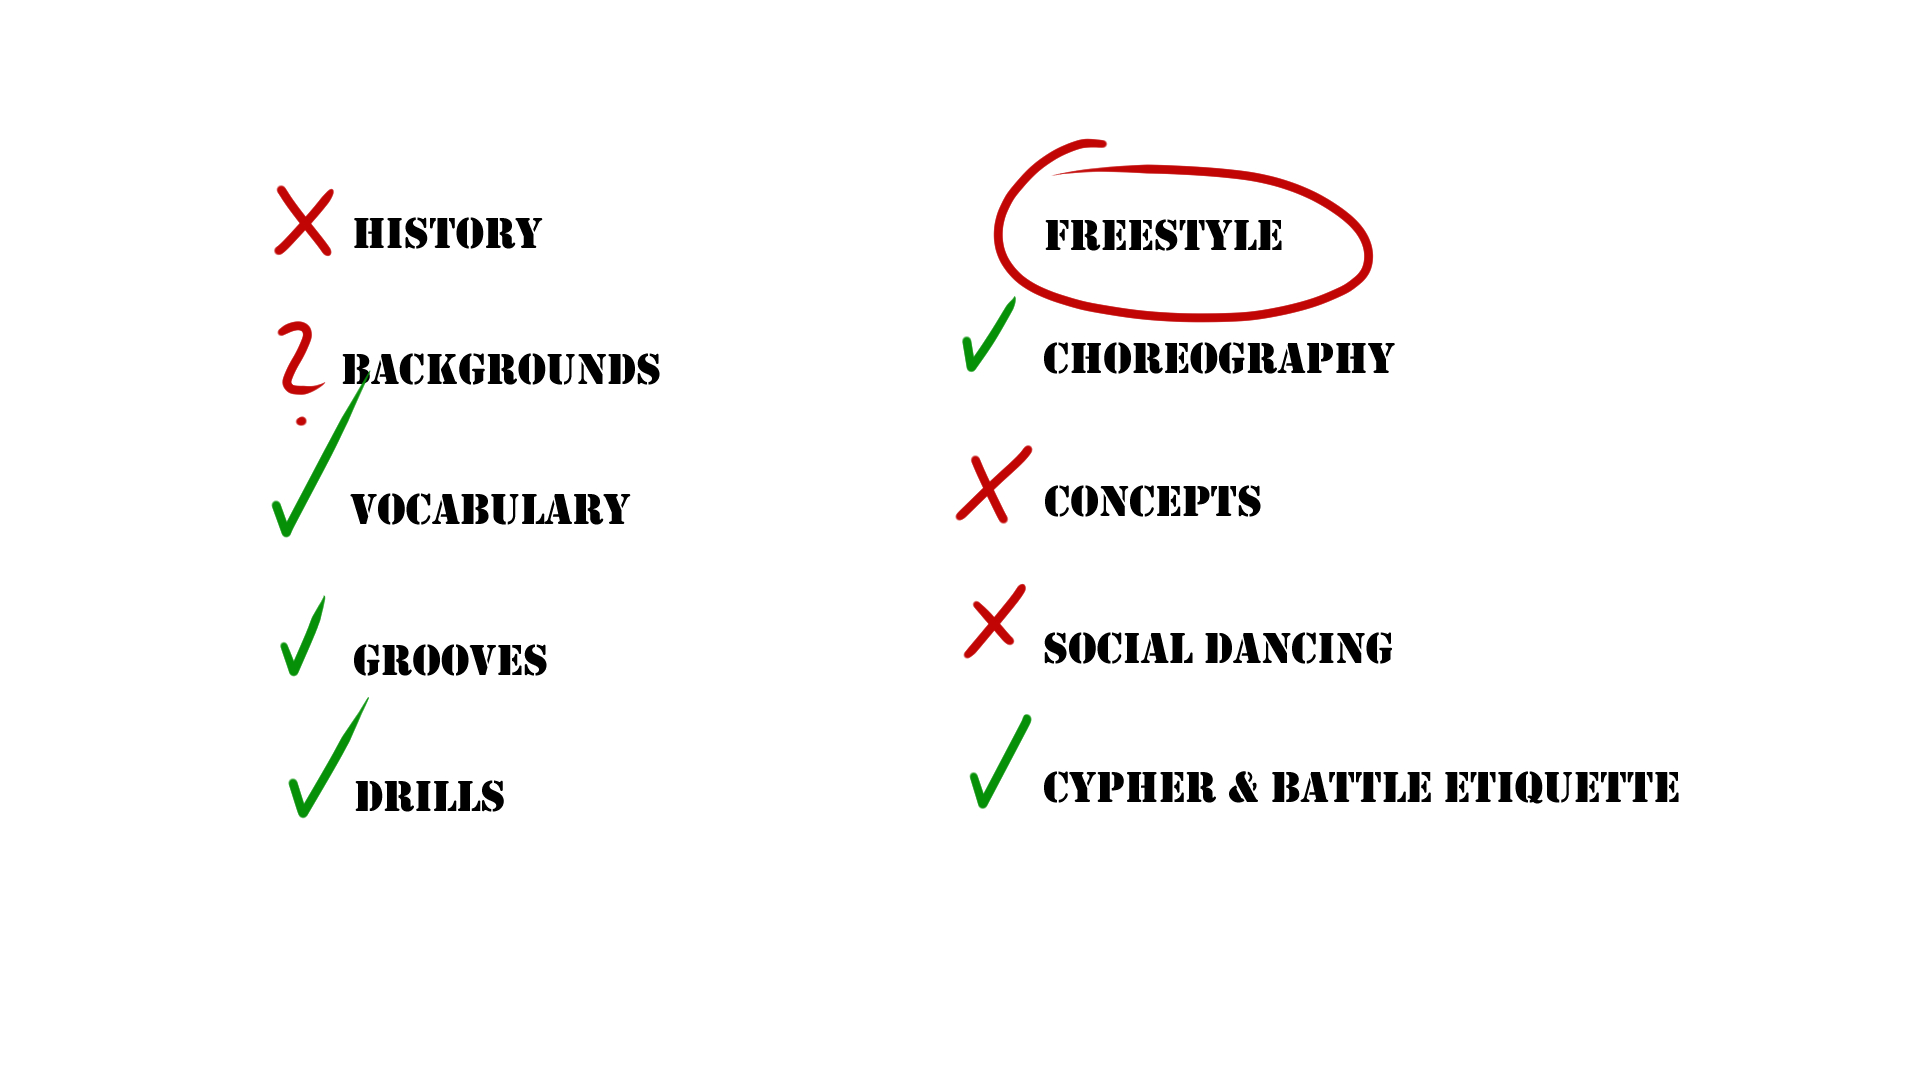 Overview about the content of a street dance class